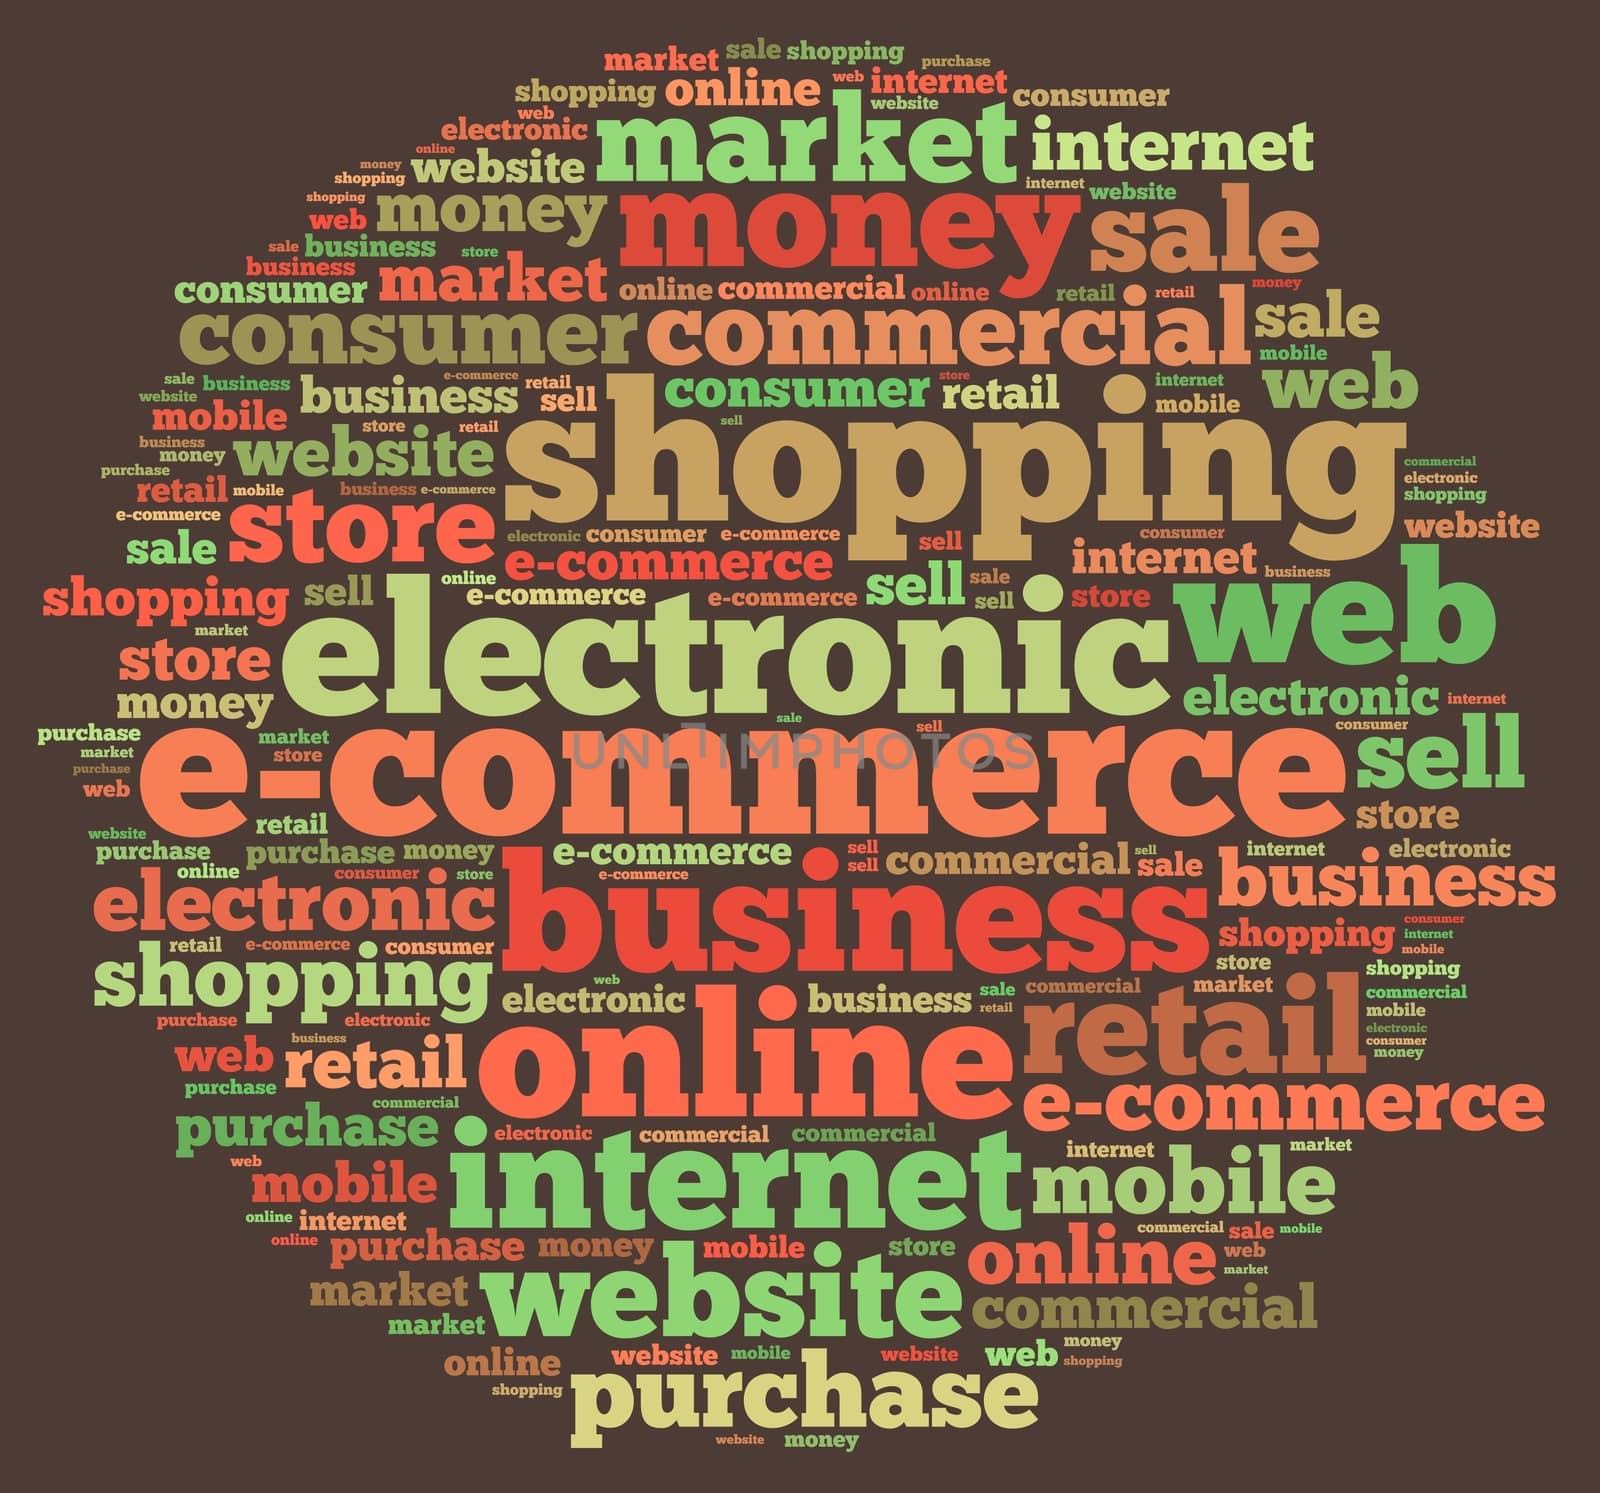 Illustration with word cloud on e-commerce